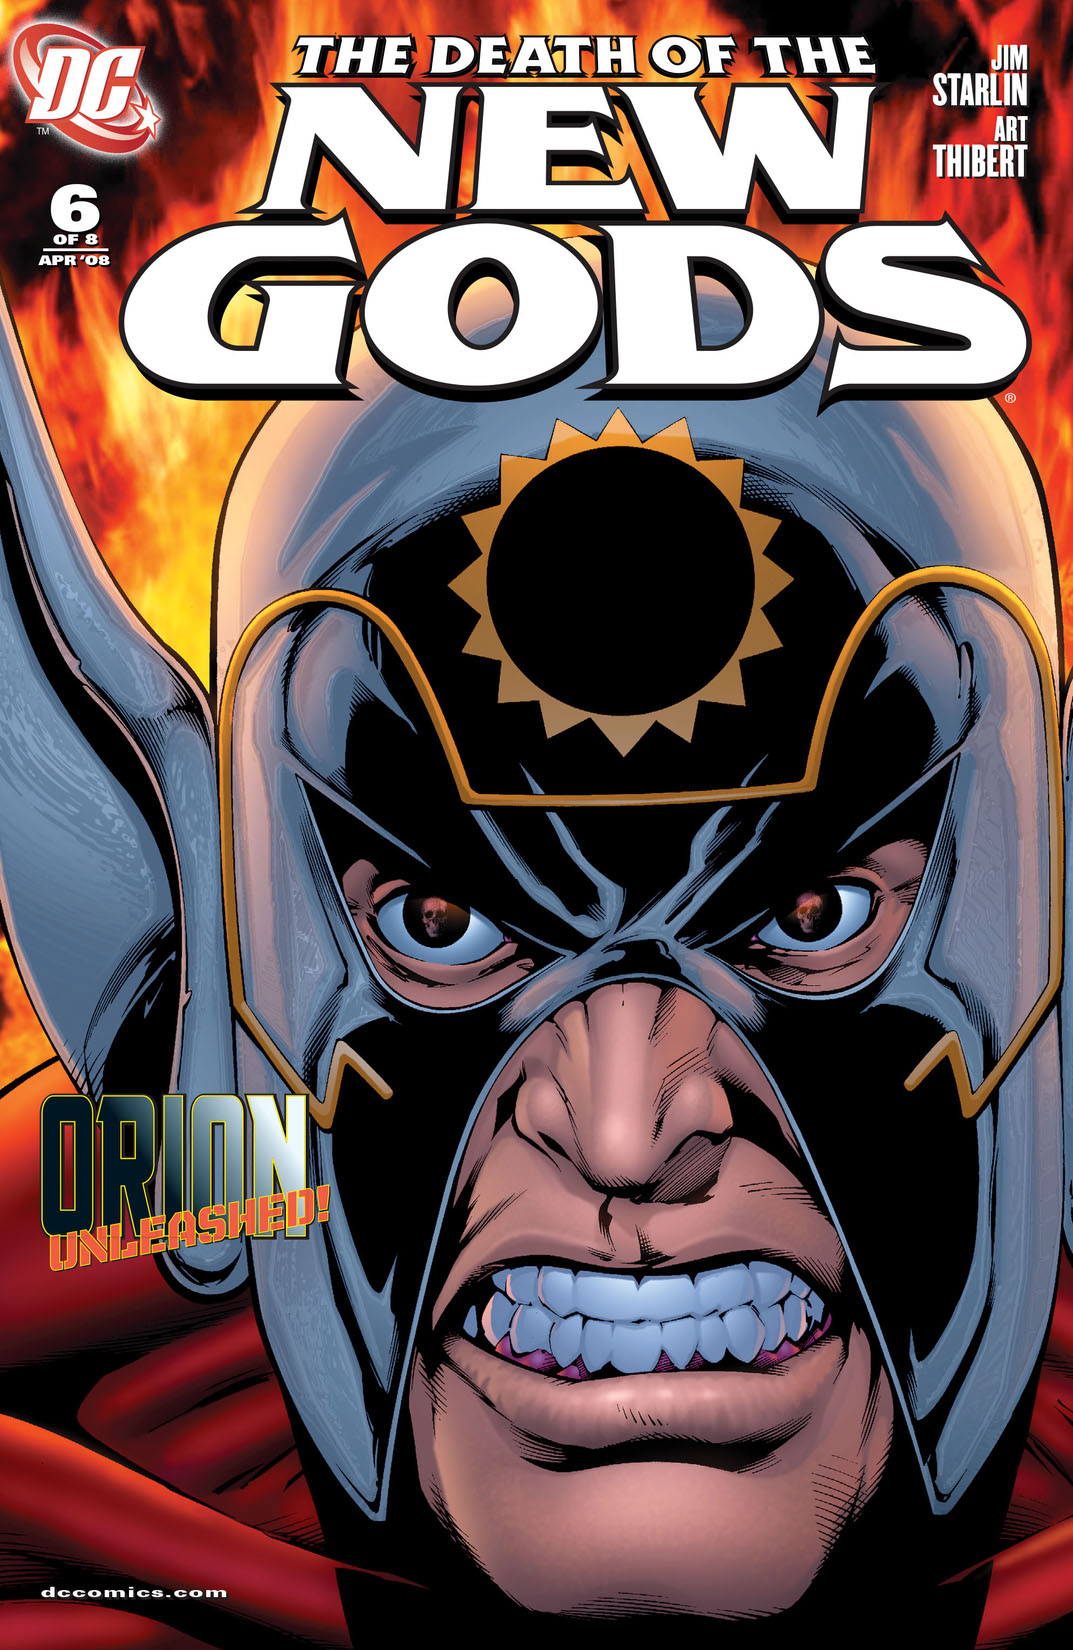 Death of the New Gods #6 preview images